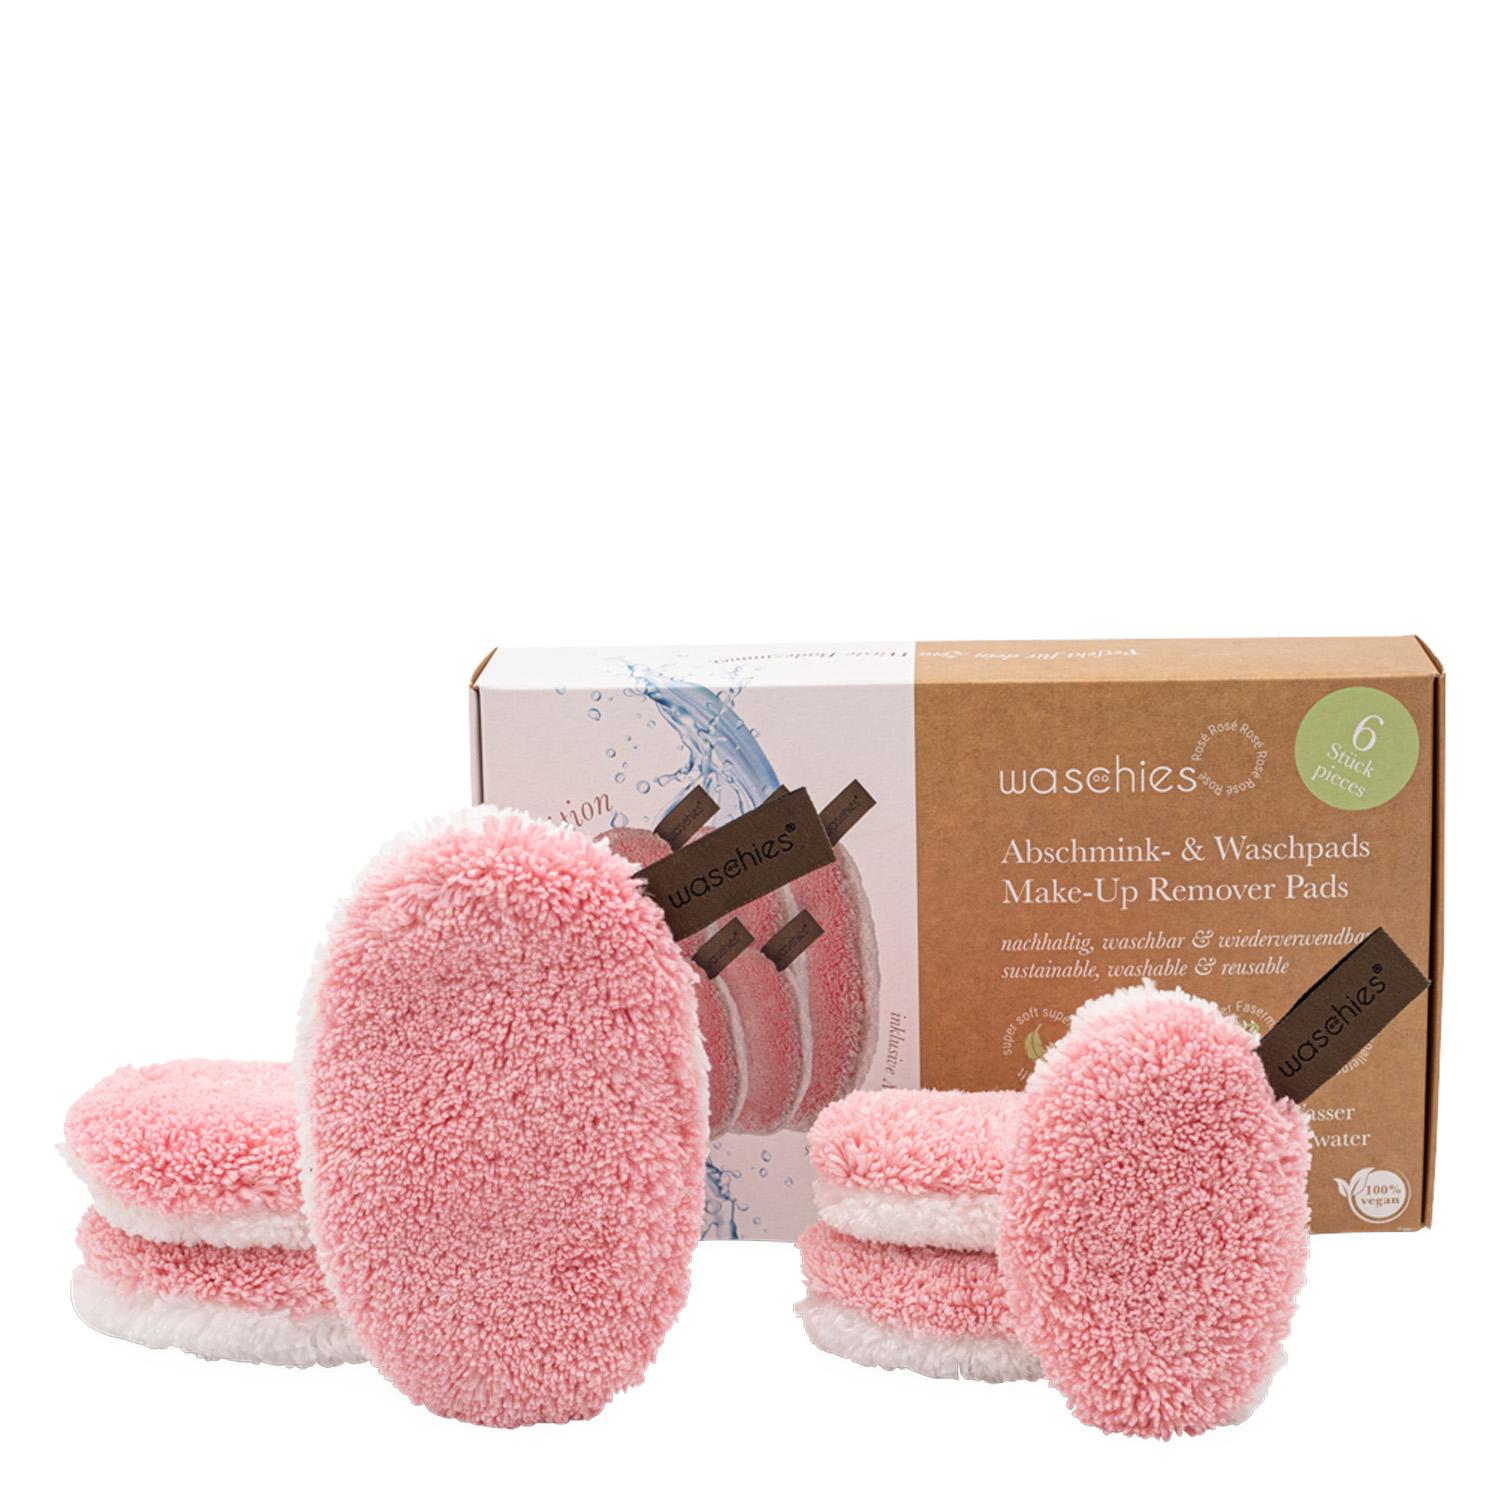 Waschies Faceline - Make-up removal pad & wash pad Rosé-Edition Set